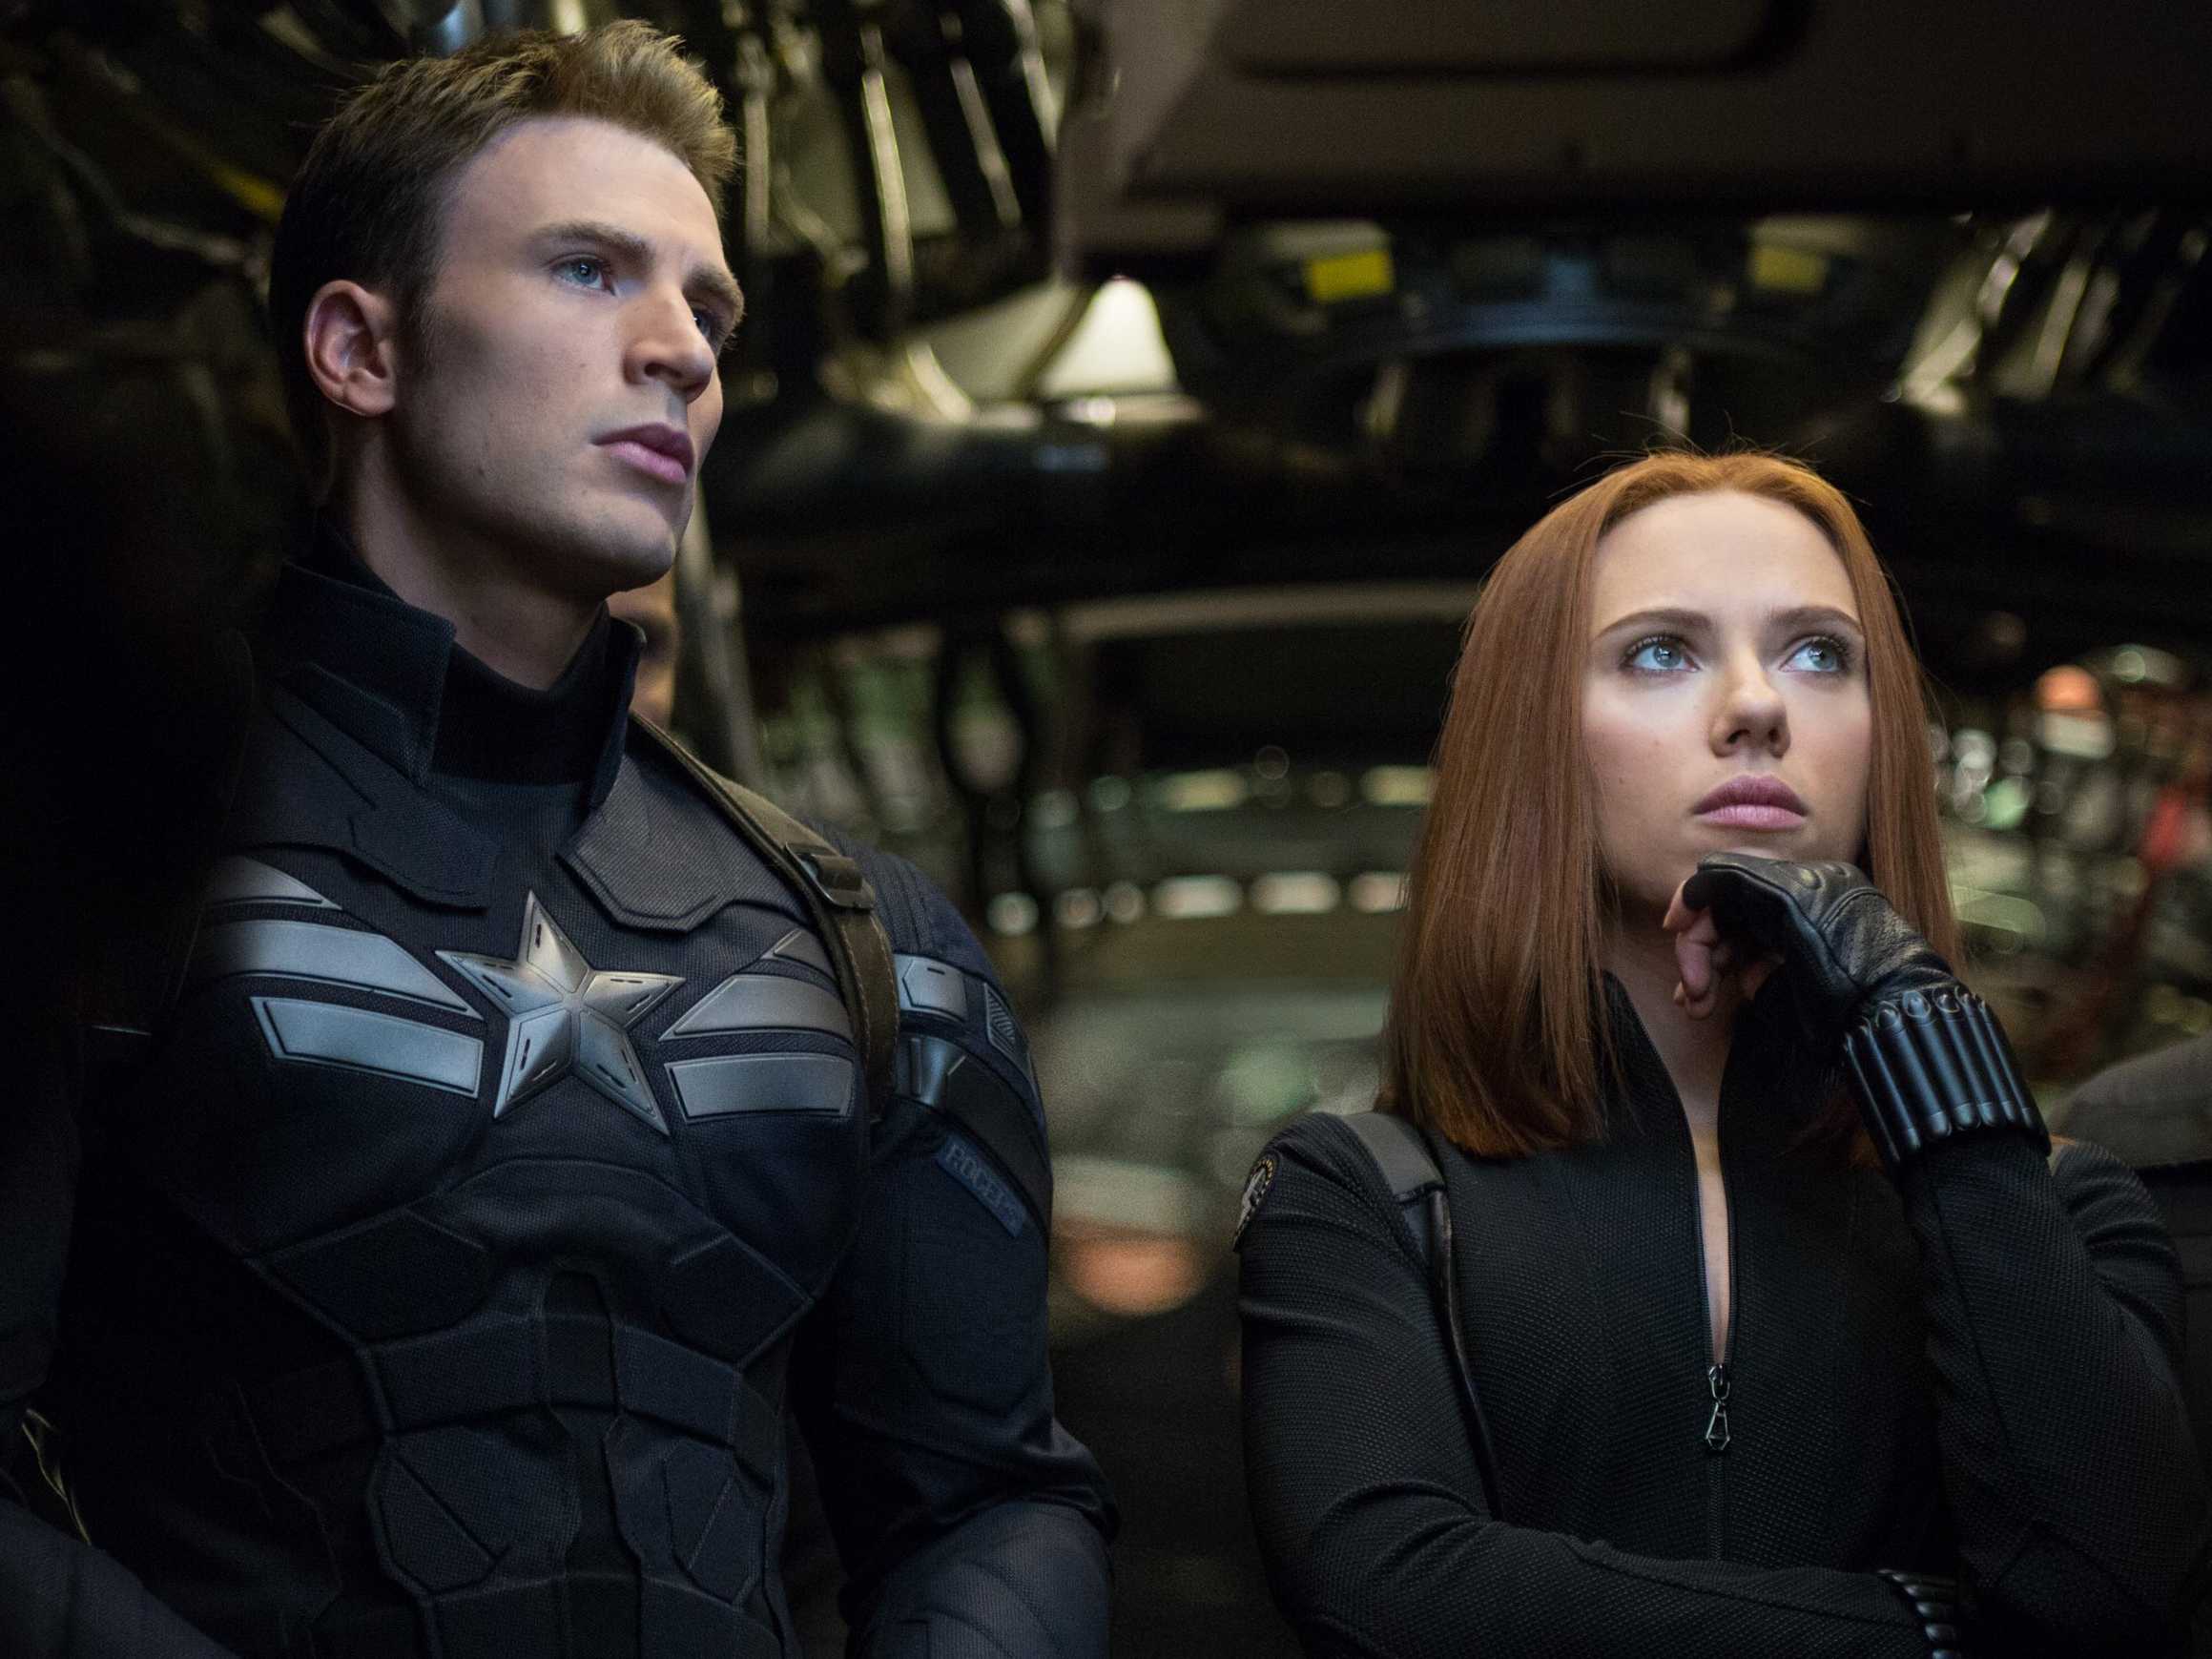 15-action-packed-photos-from-captain-america-the-winter-soldier.jpg